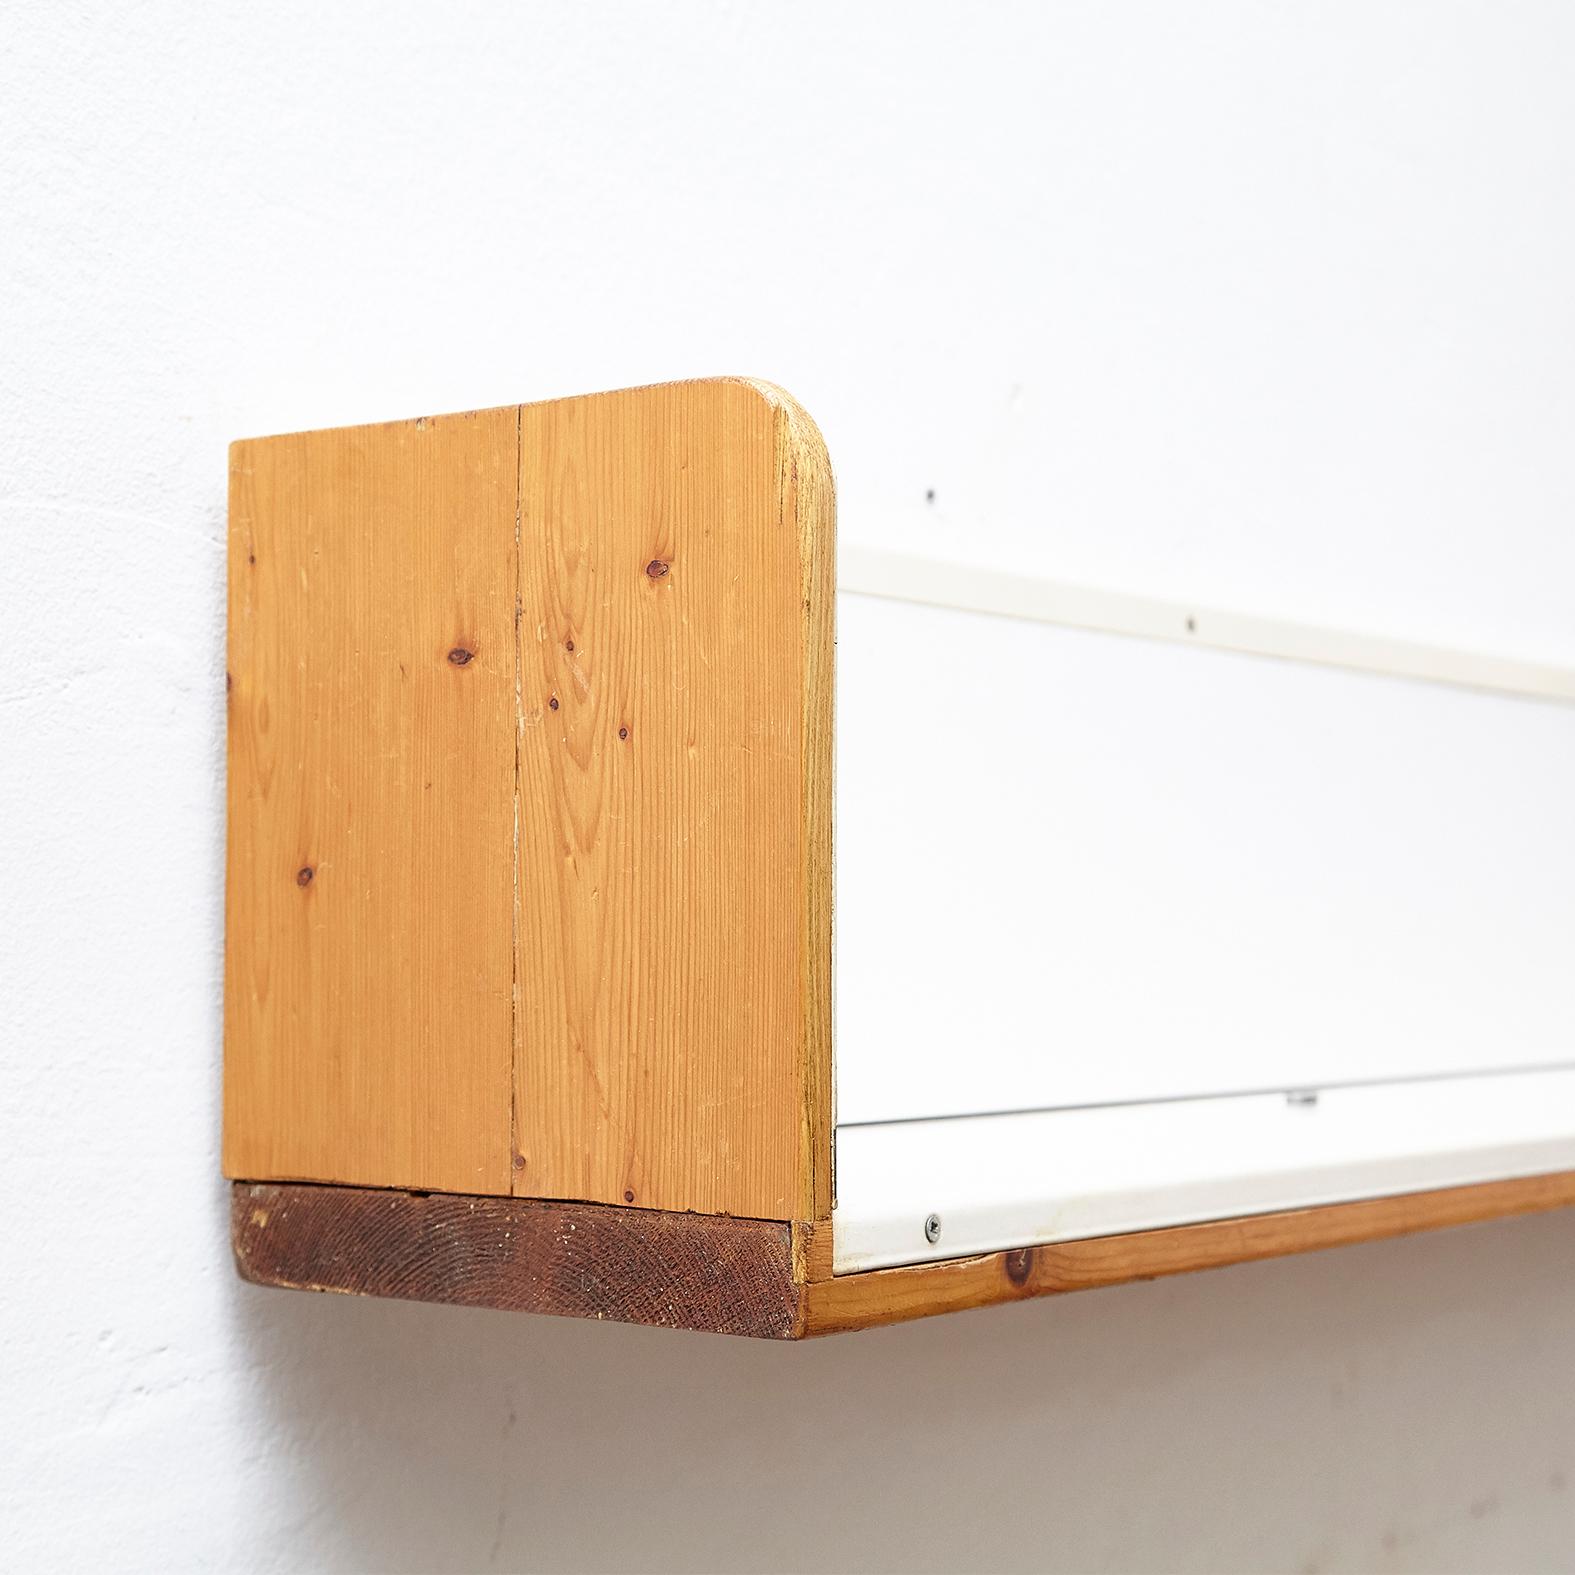 Shelve designed by Charlotte Perriand for Les Arcs, circa 1960, manufactured in France.
Pinewood and metal.

We have two available.

In good original condition, with minor wear consistent with age and use, preserving a beautiful